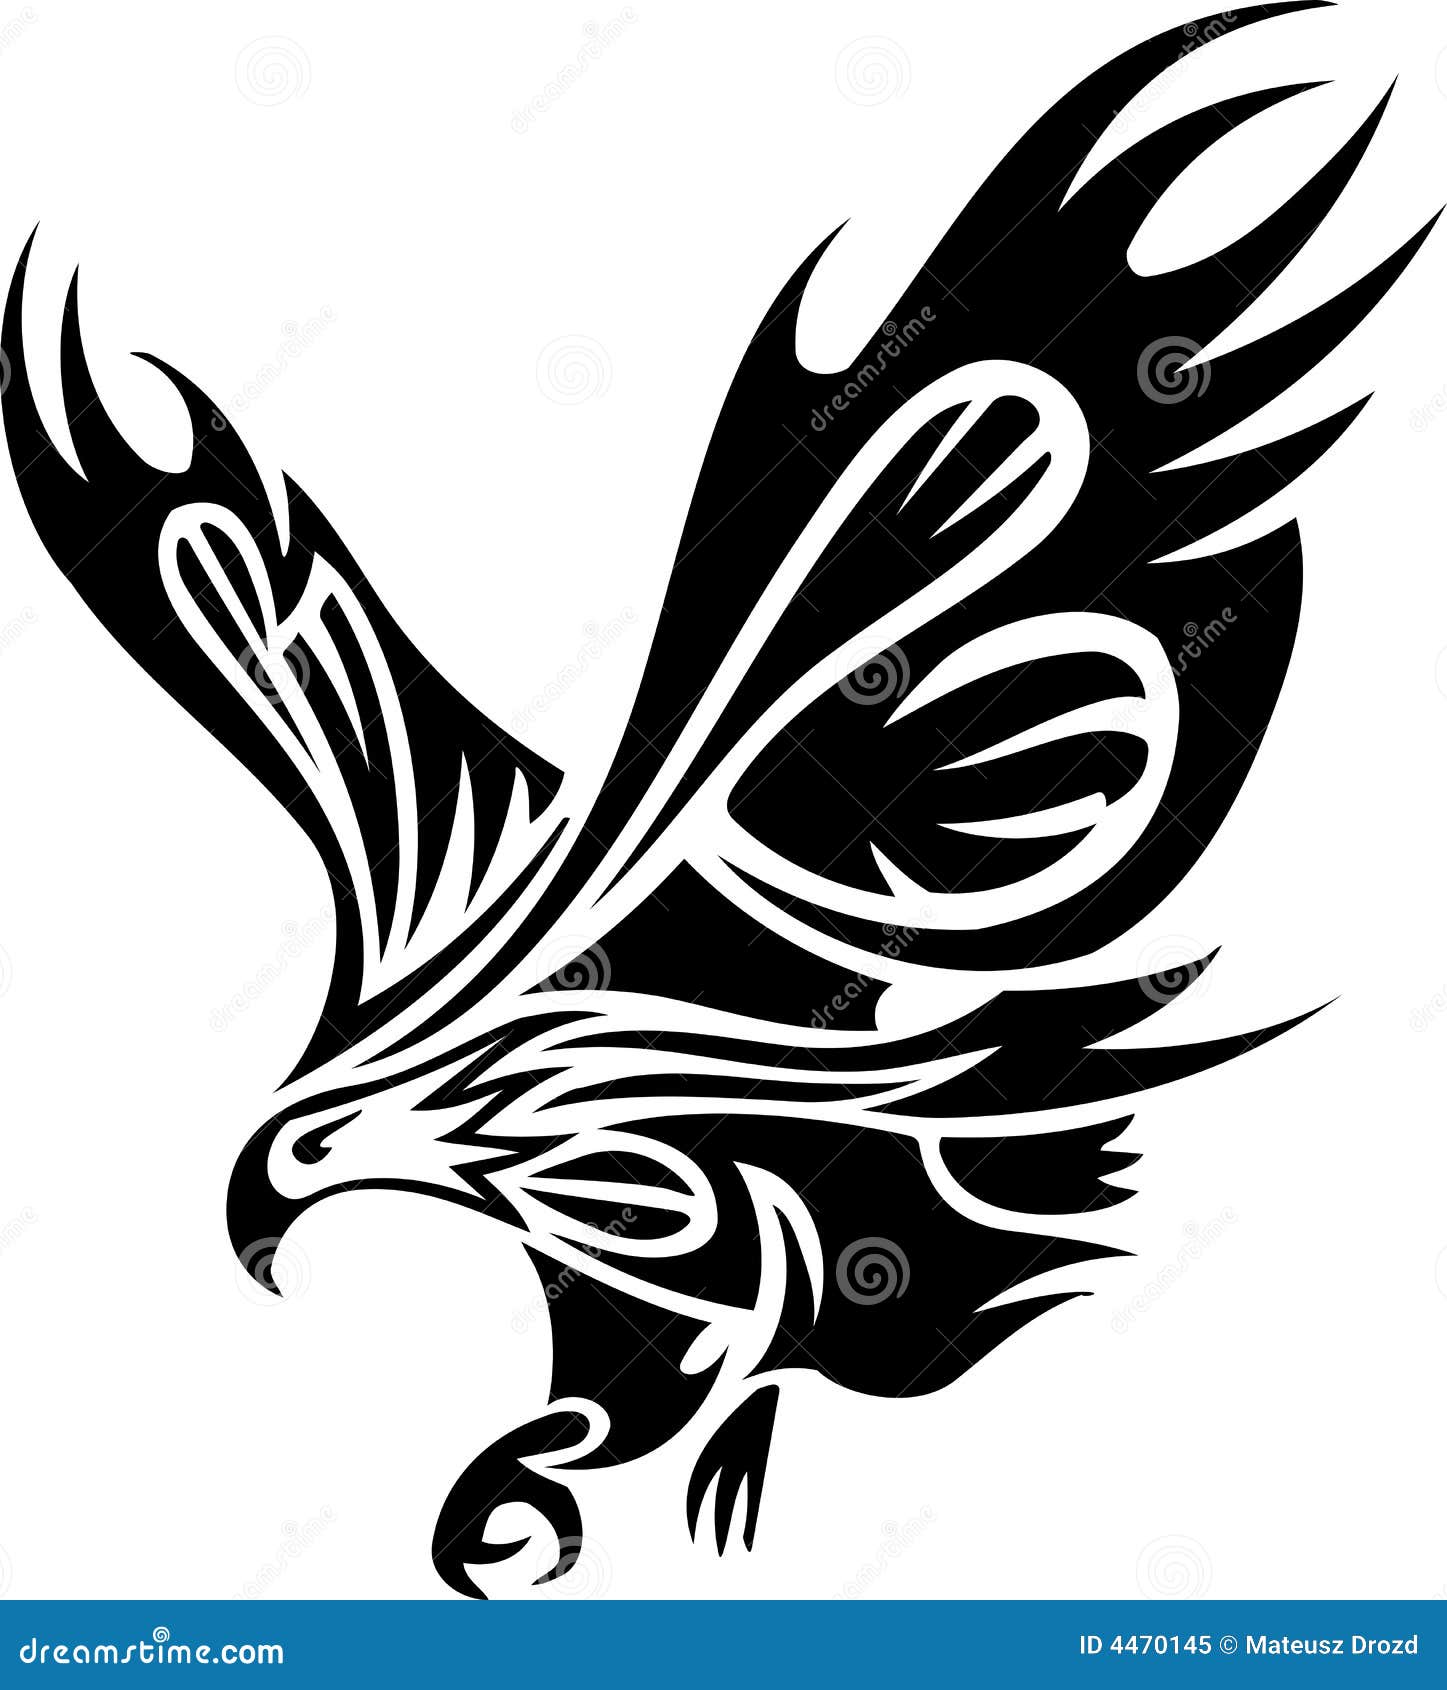 Premium PSD | A set of eagles tattoo style with the words eagles on the  bottom.